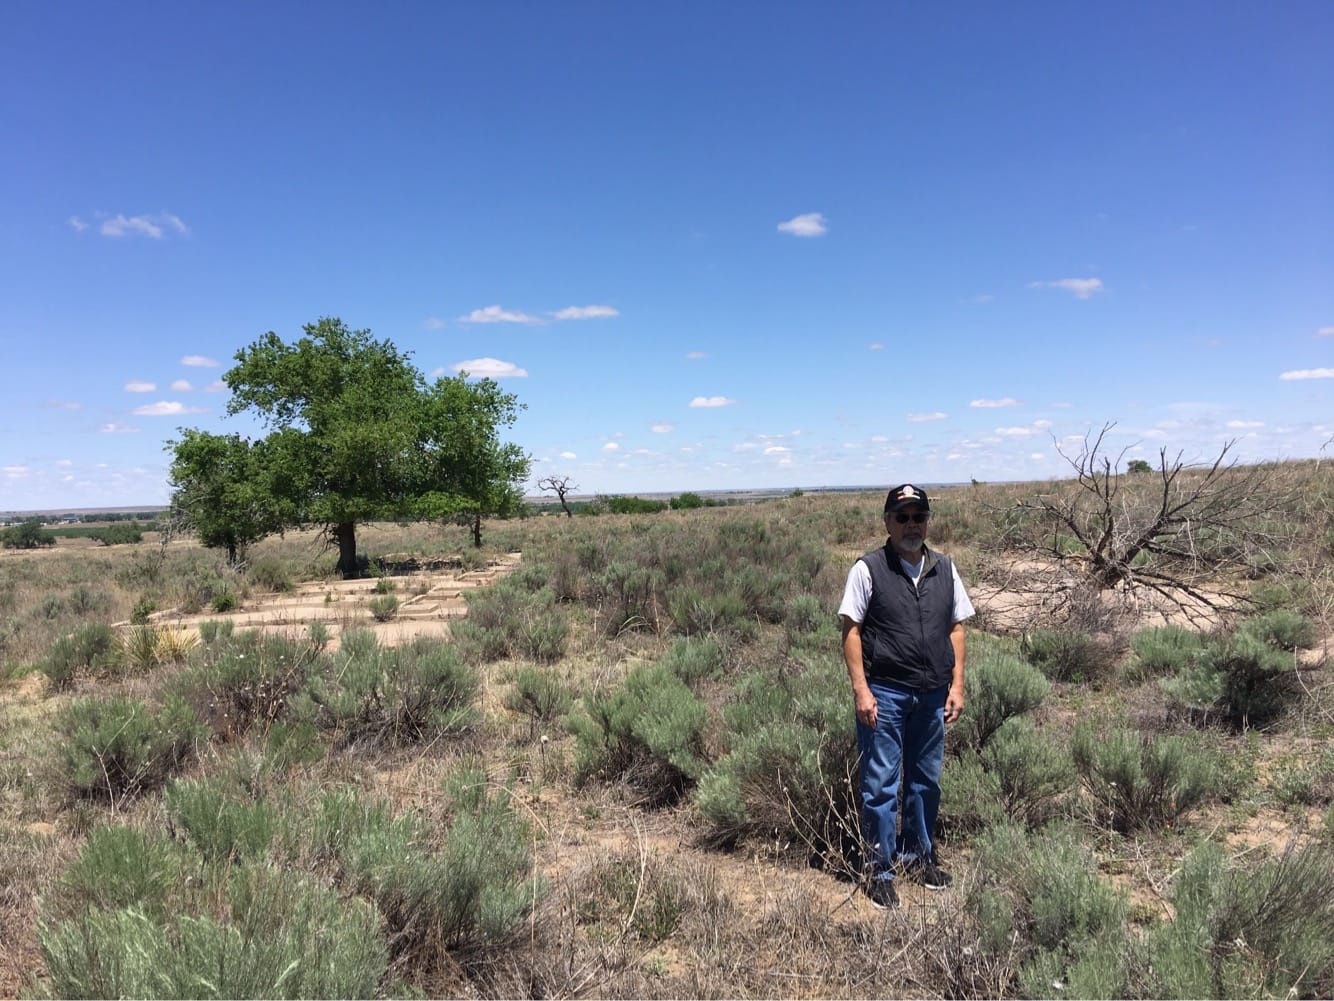 Dennis Otsuji, at the site of his birthplace at Amache Internment Camp. Jim's maps enabled him to show Dennis to the site of the barrack where he was born during WWII